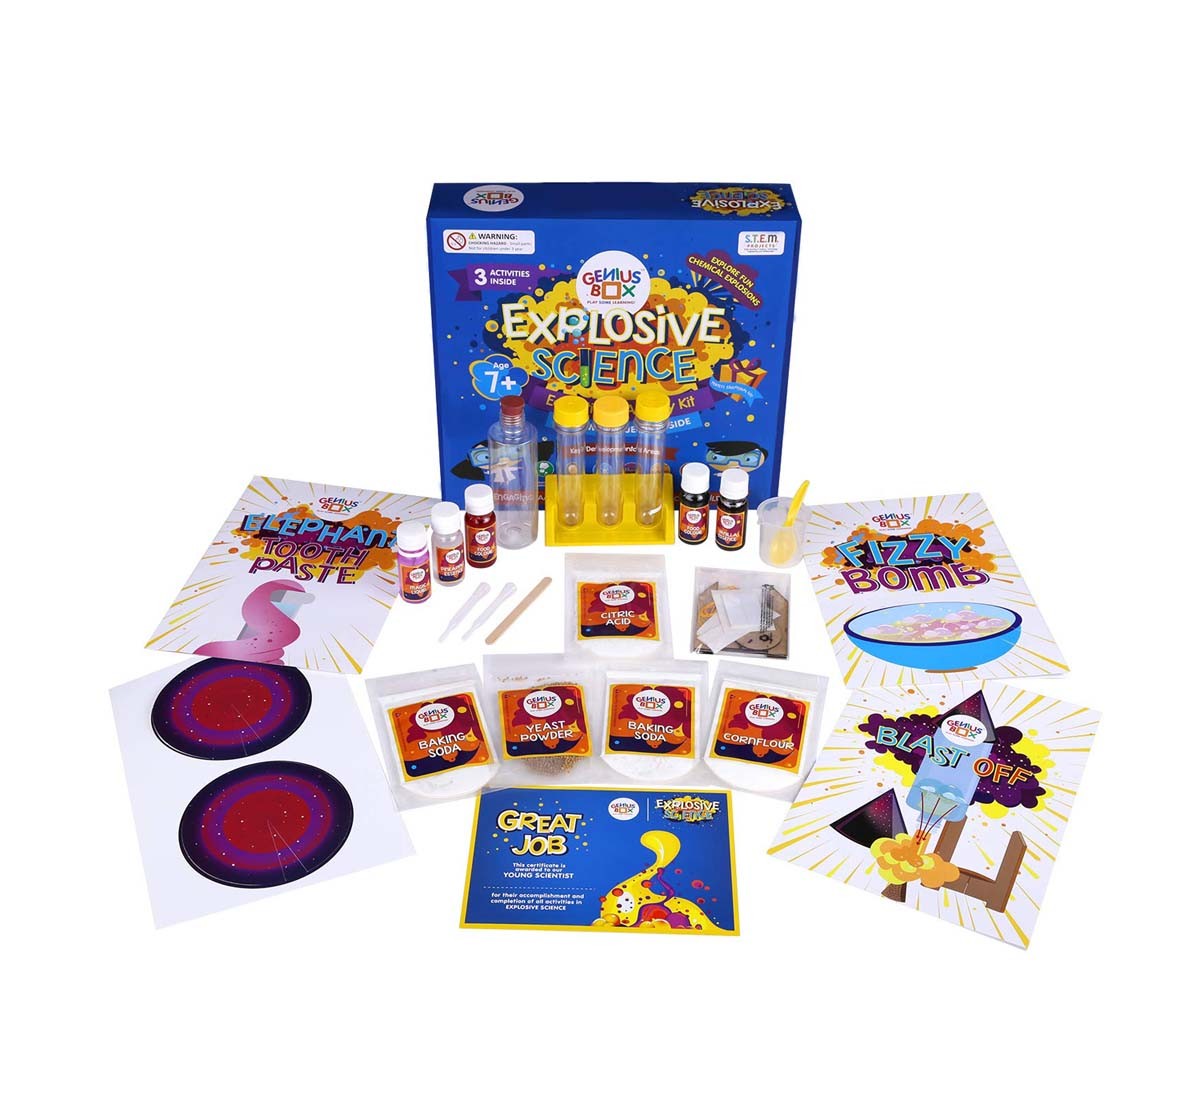 Genius Box Explosive Science 3 Activity Kit for 7+ Year Age: Diy, Educational Toy, Educational Kit, Stem Toy, Science Experiment, Learning Kit Science Kits for Kids Age 7Y+